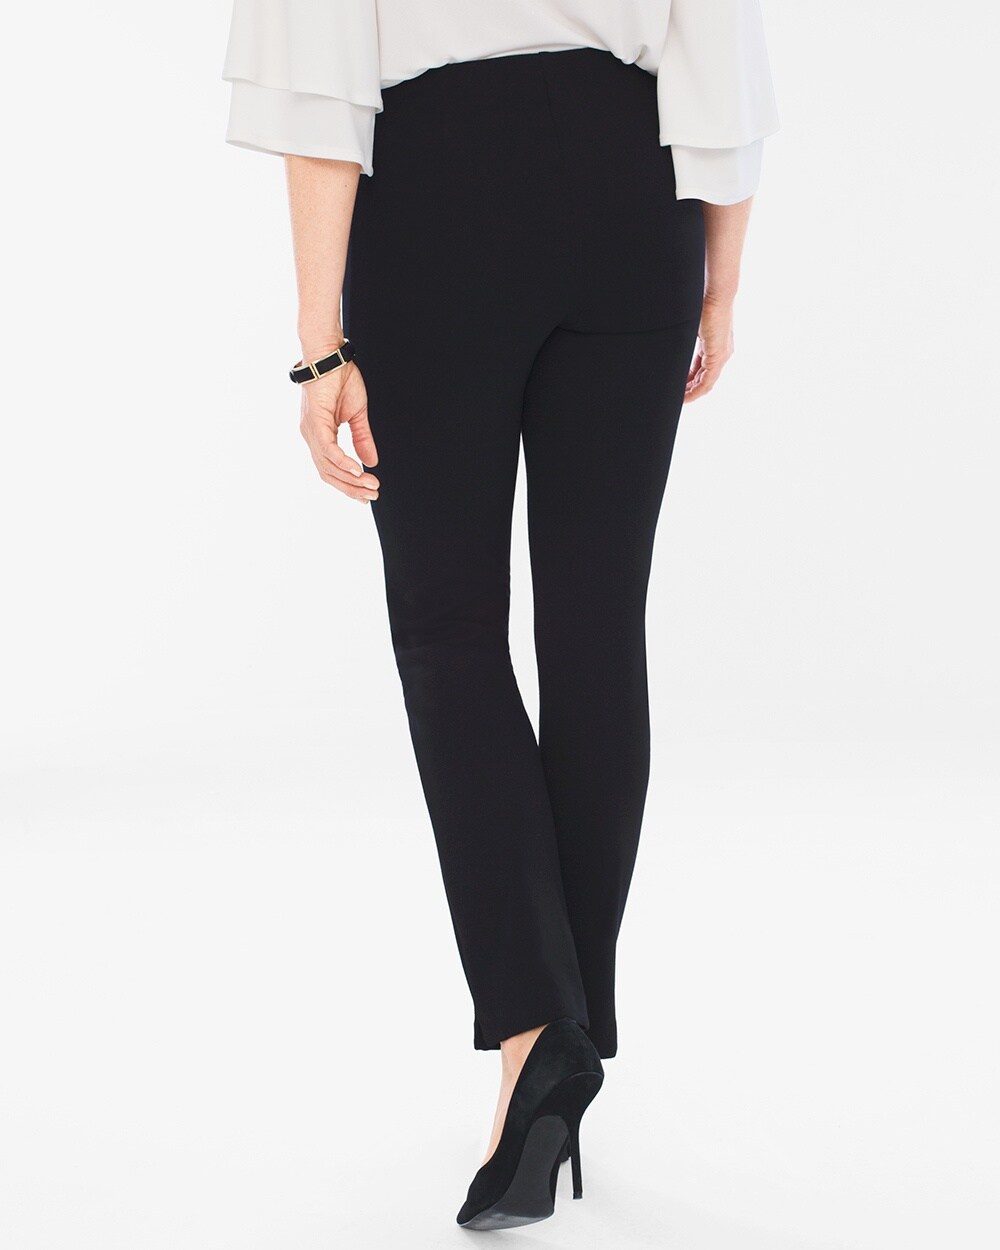 Juliet Ankle Pants in Black - Chico's